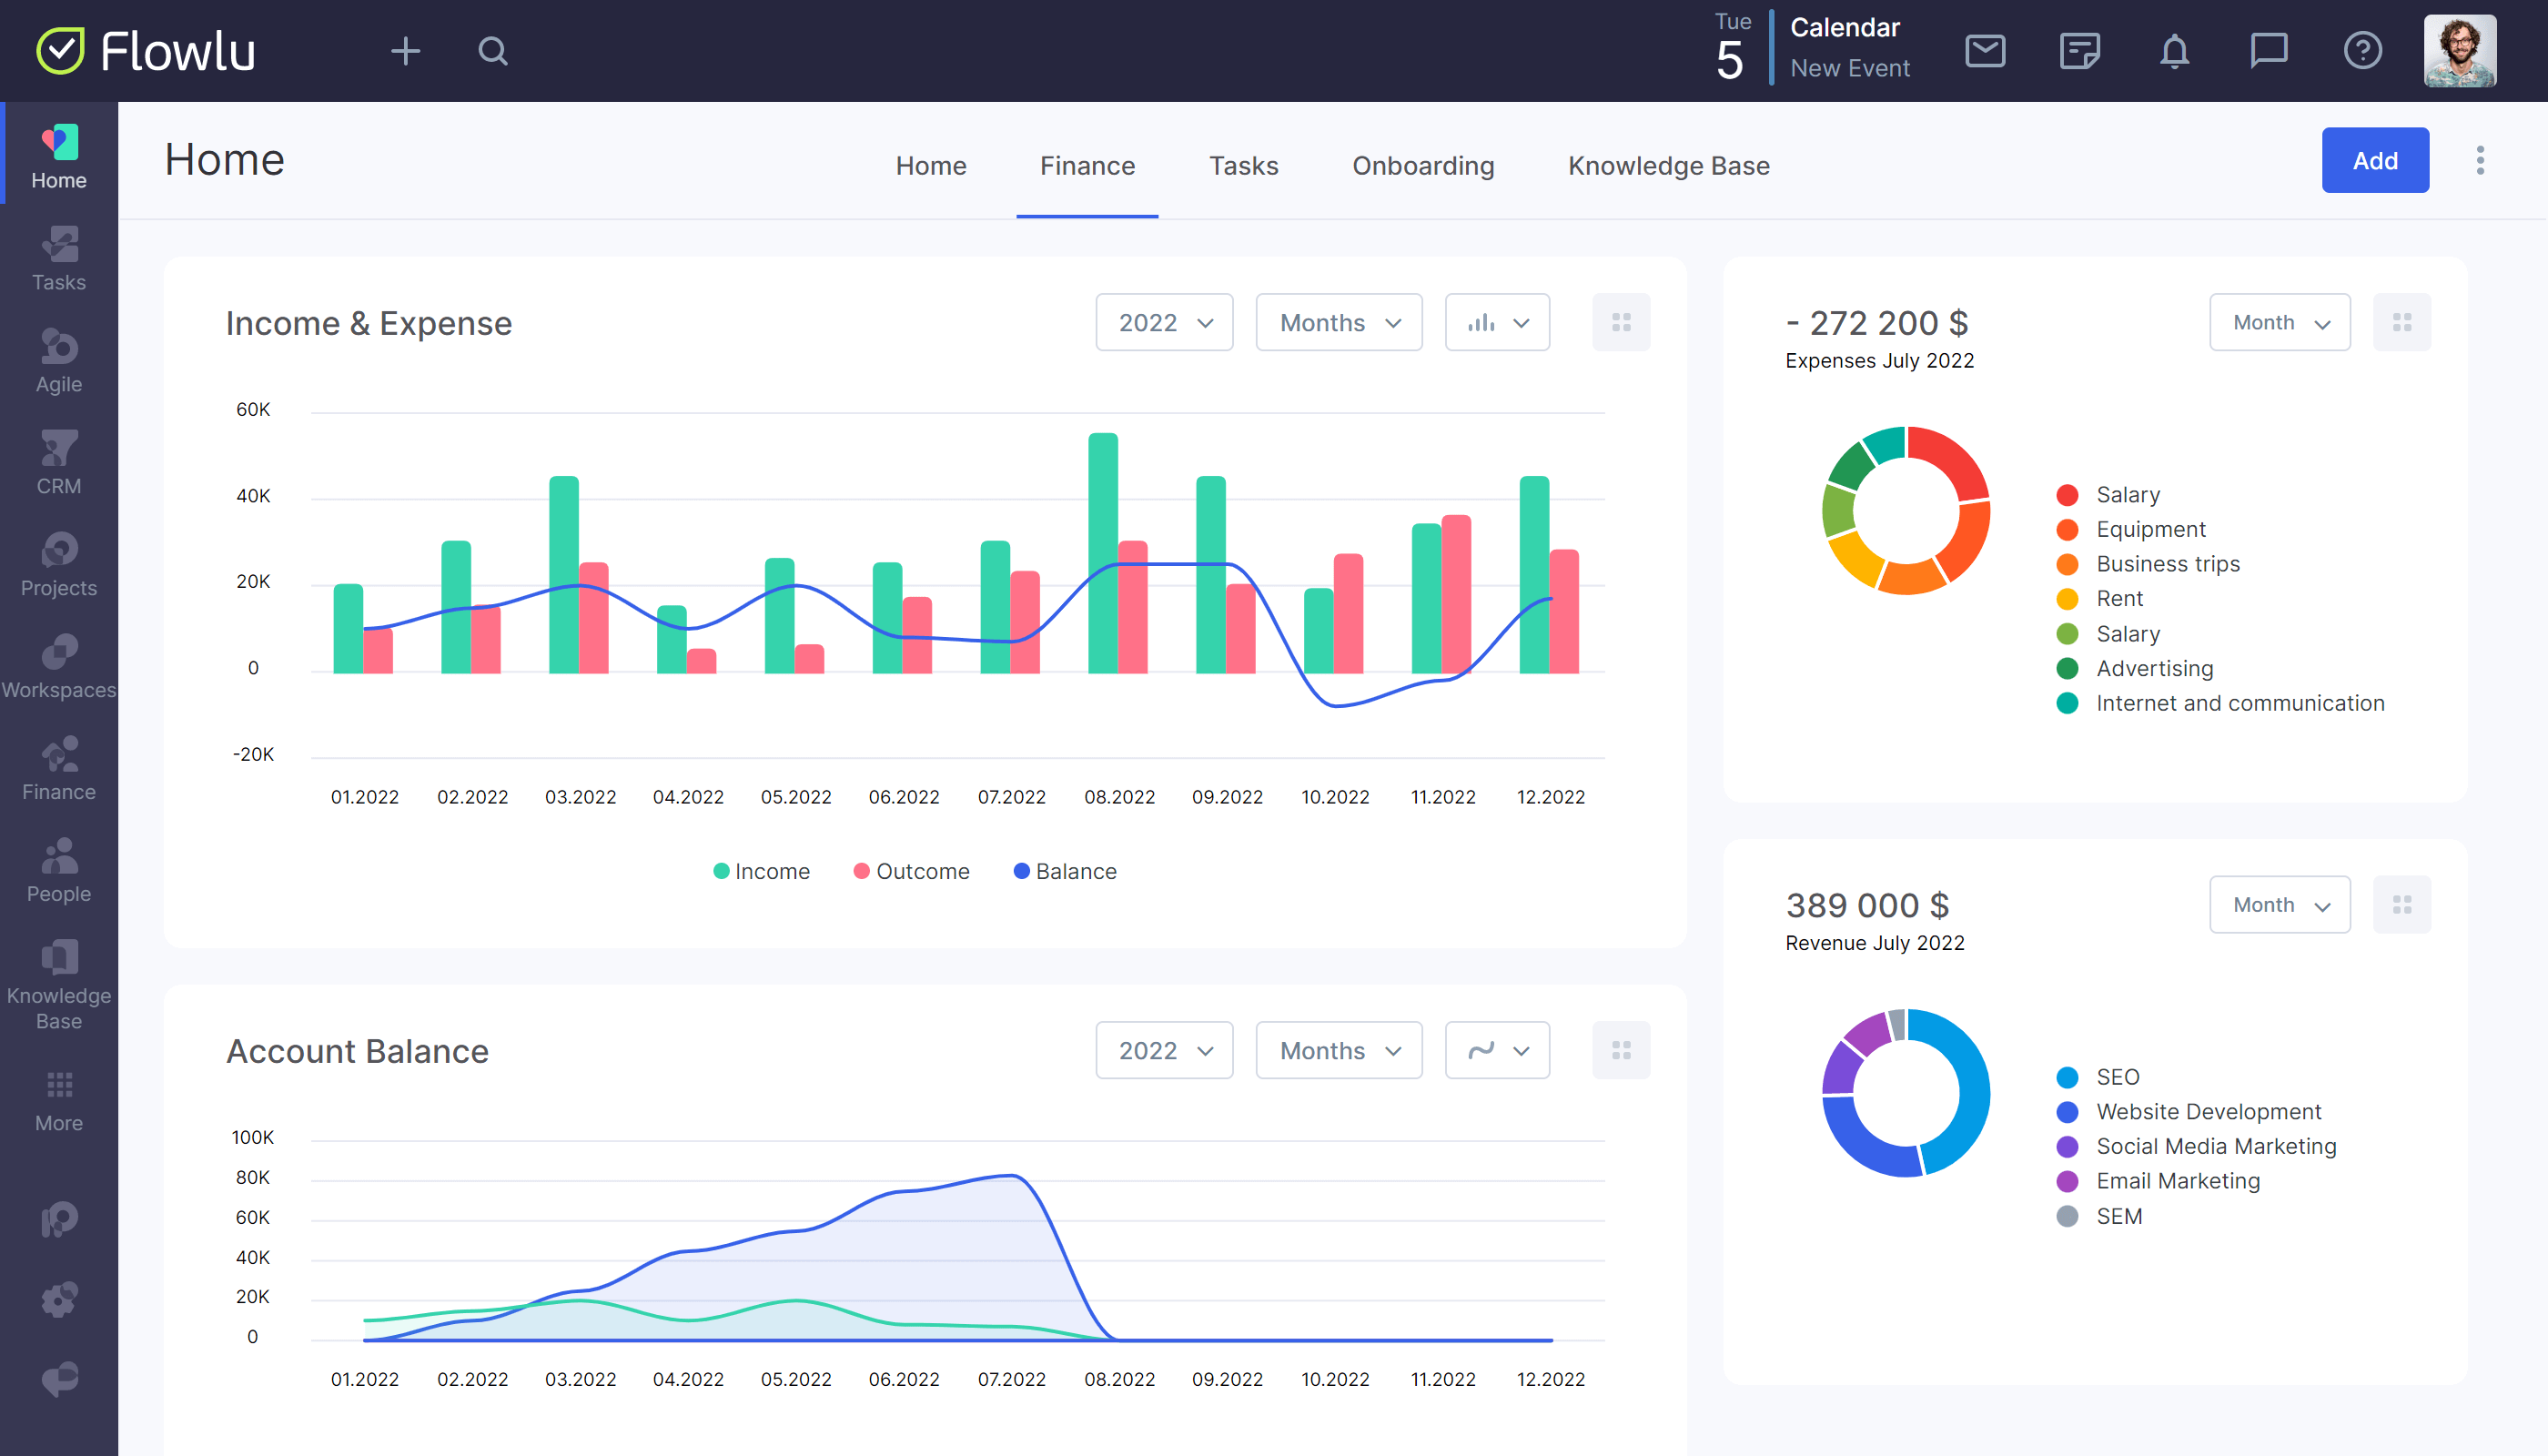 Flowlu - Gain Insights With Financial Reports